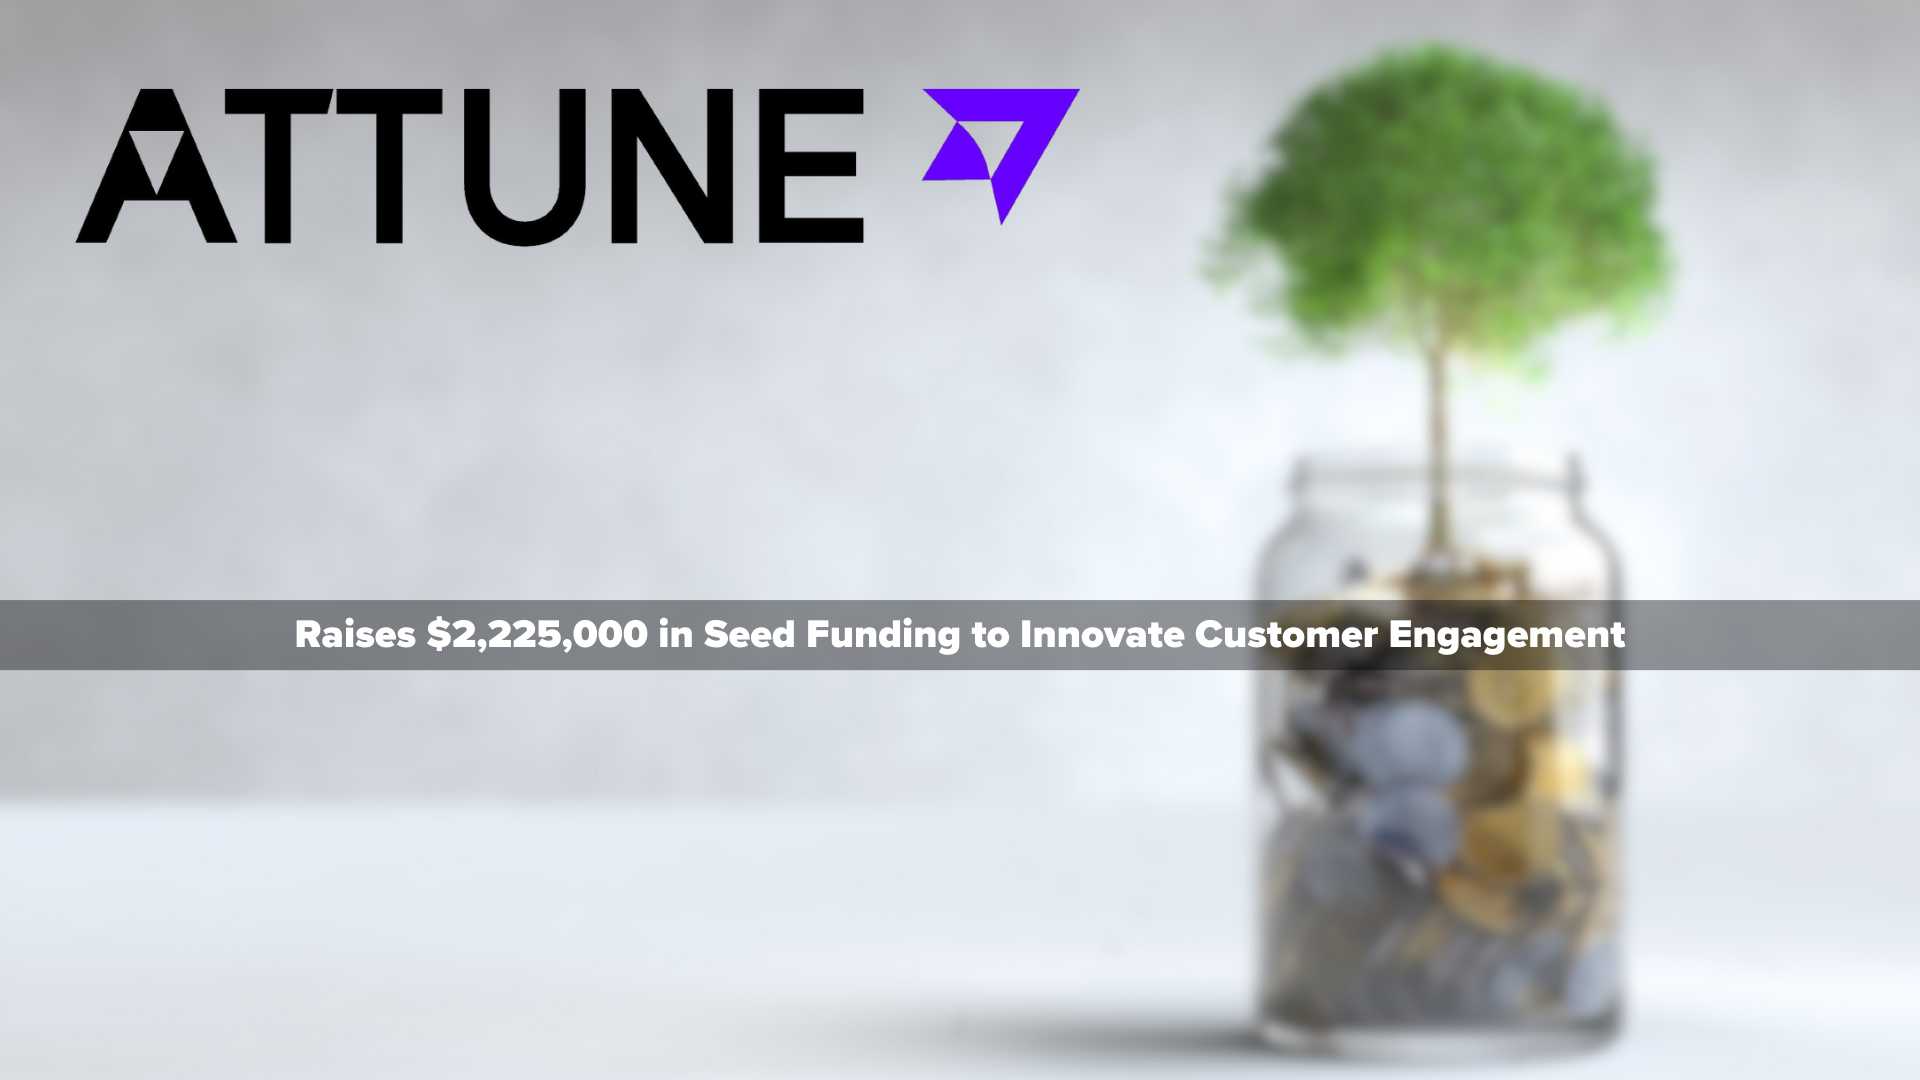 ATTUNE Raises $2,225,000 in Seed Funding to Innovate Customer Engagement in Banking